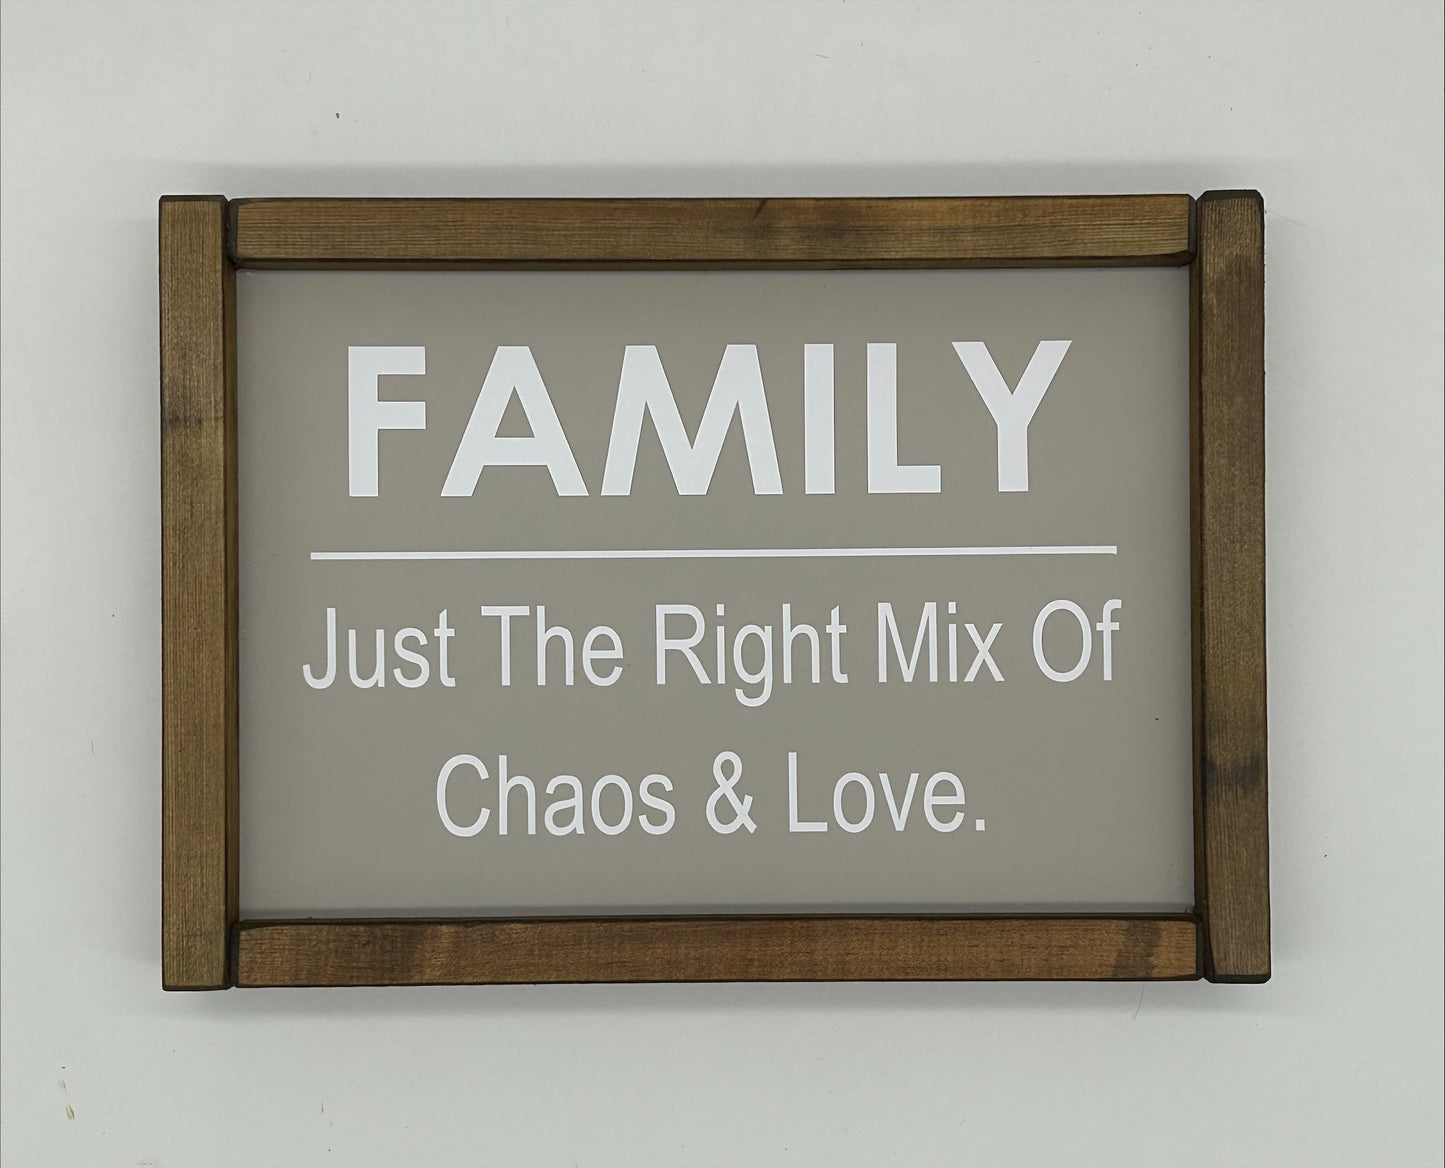 Family, just the right mix of chaos and love